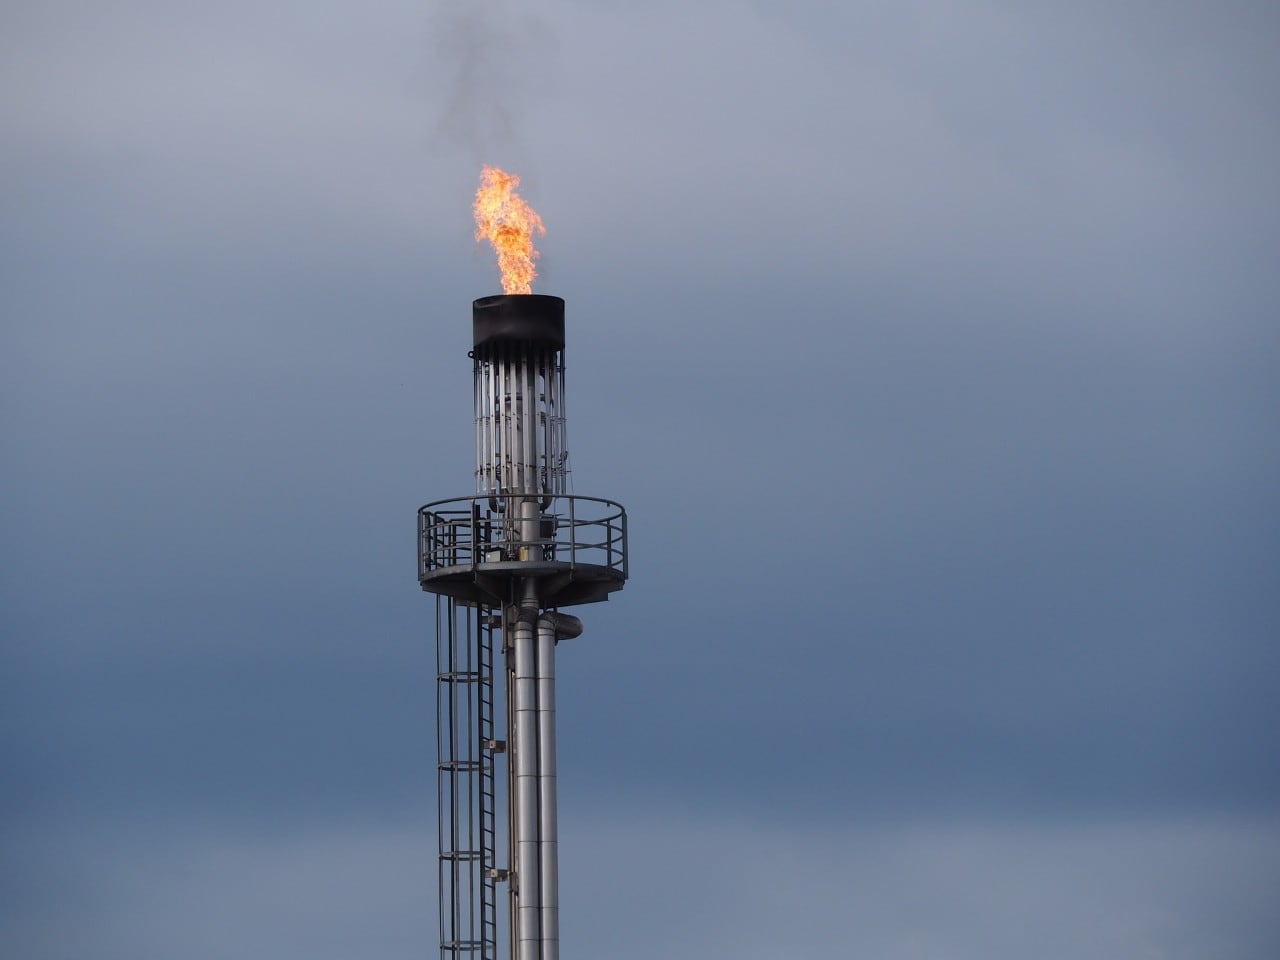 Photo of a gas flame coming from an oil rig tower